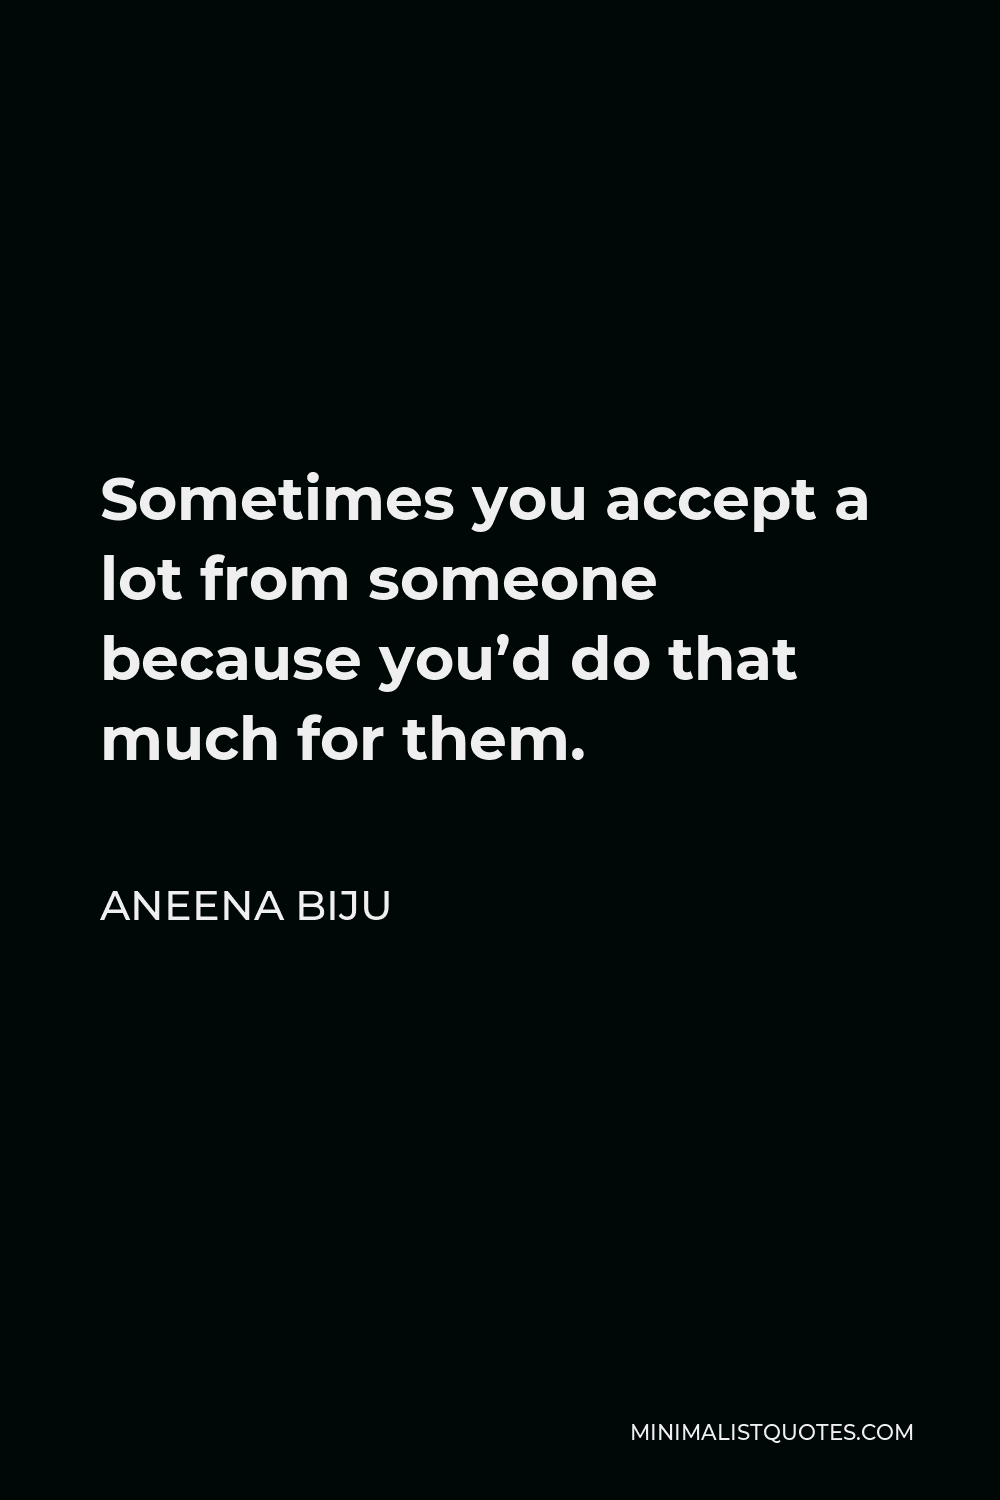 Aneena Biju Quote - Sometimes you accept a lot from someone because you’d do that much for them.